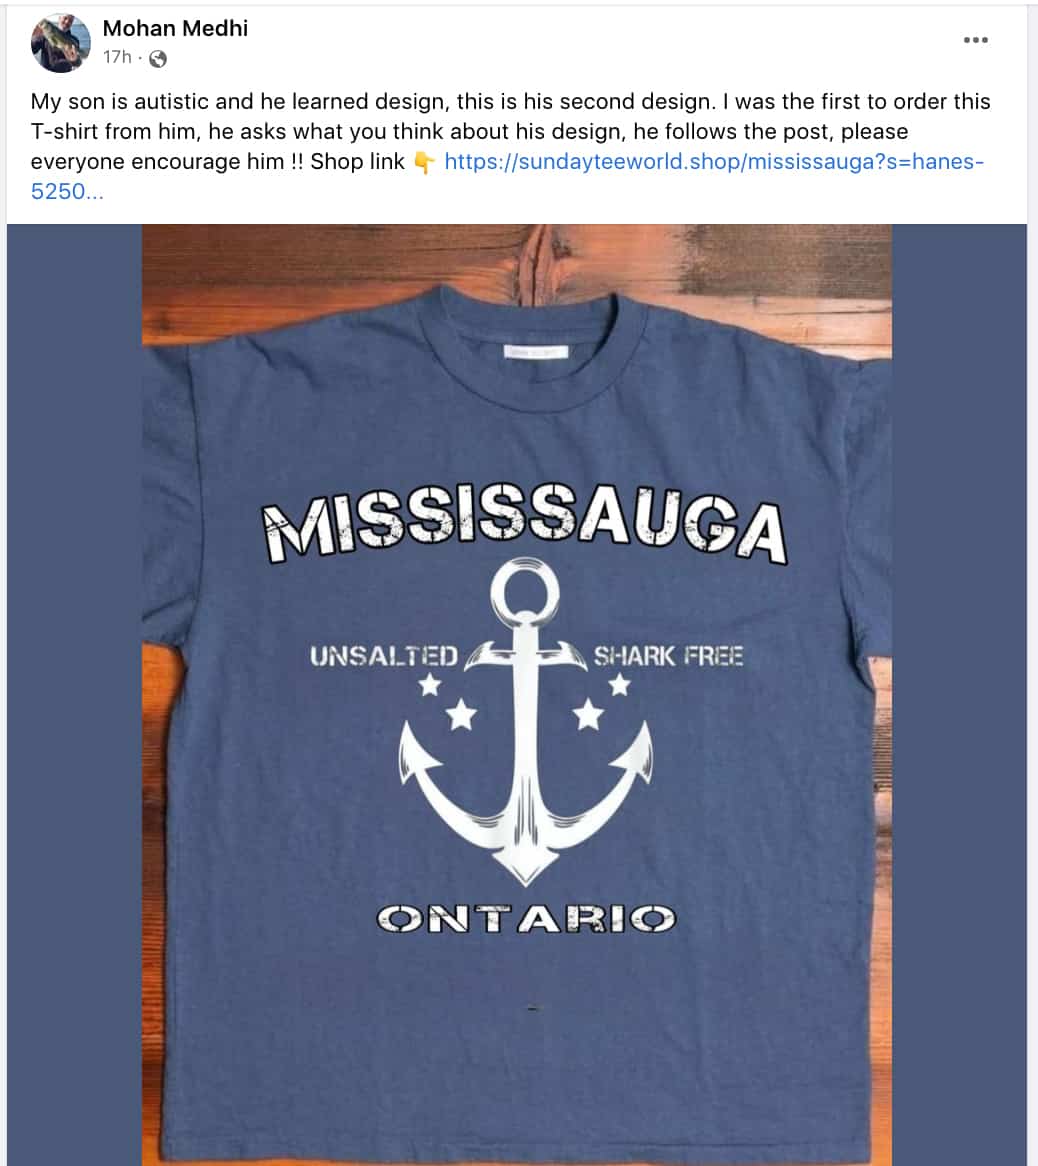 Autism t-shirt scam hits Mississauga community Facebook groups